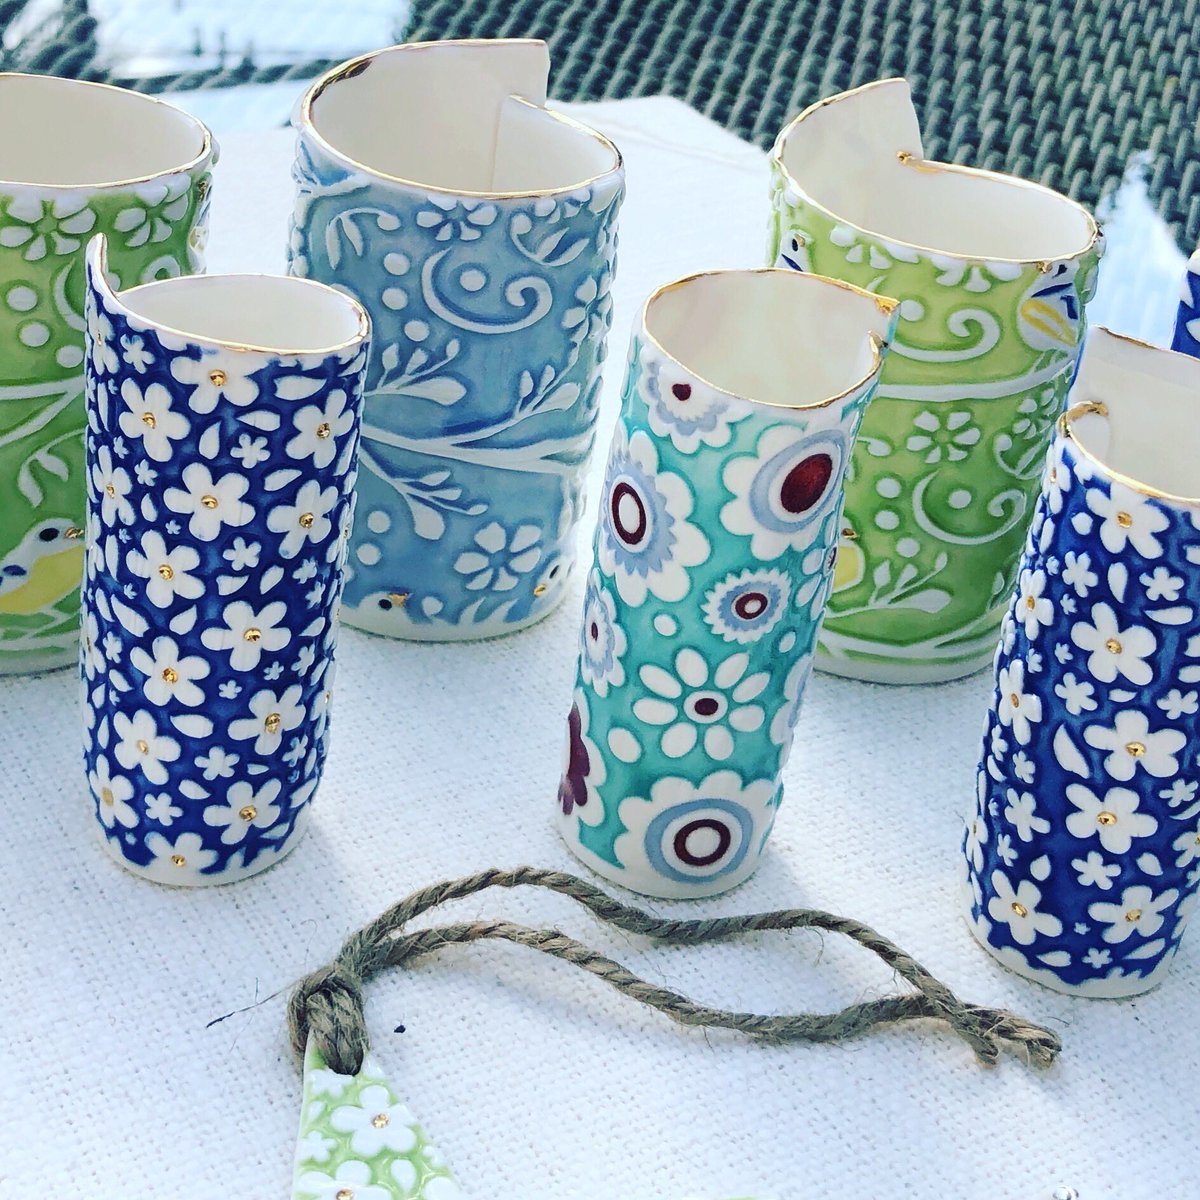 Good evening #DevonHour and #HandmadeHour may I show these #candle #vases just out of the #kiln today please? #porcelain #madebyme #gold #bling #Devon #DevonArtistNetwork